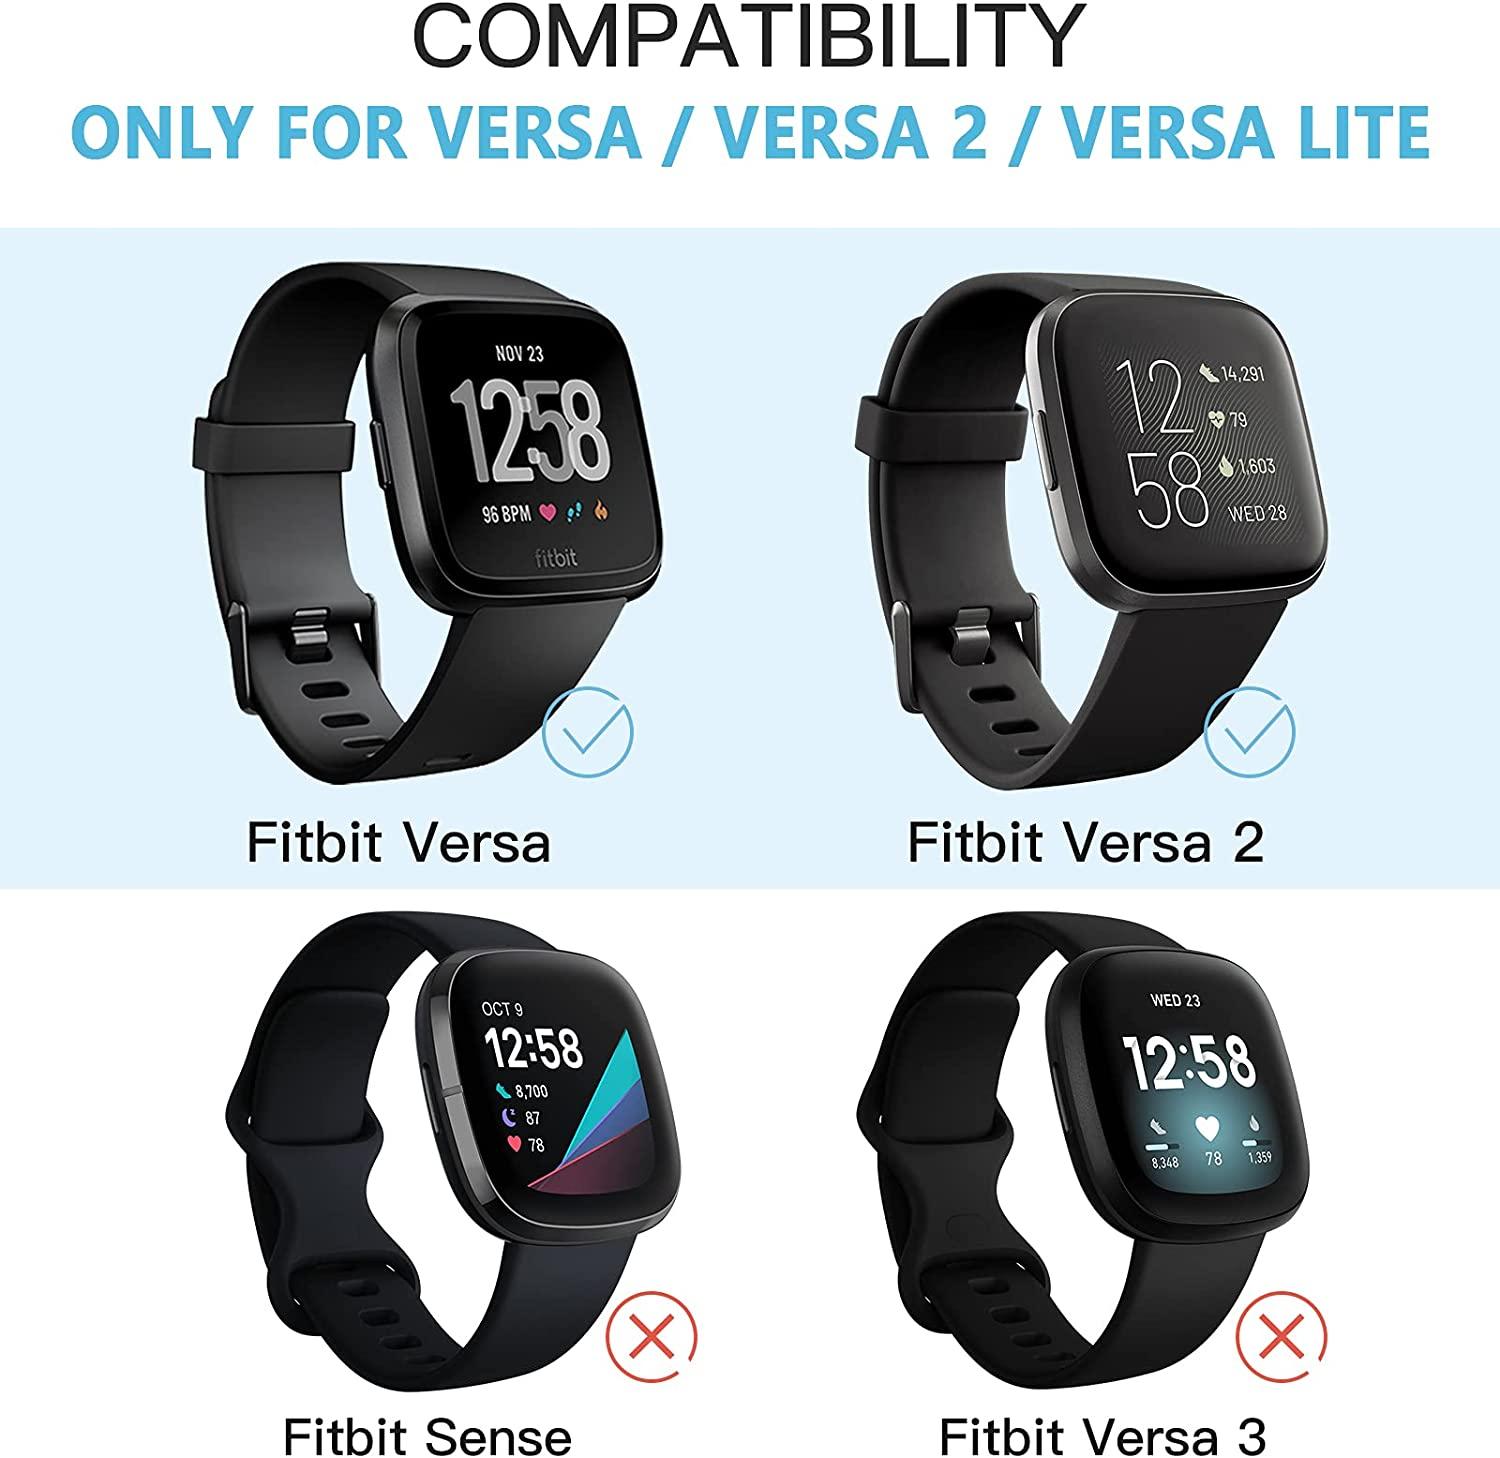 6 Pack Sport Bands Compatible with Fitbit Versa 2 / Versa/Versa Lite/Versa  SE, Classic Soft Silicone Replacement Wristbands for Smart Watch Women Men